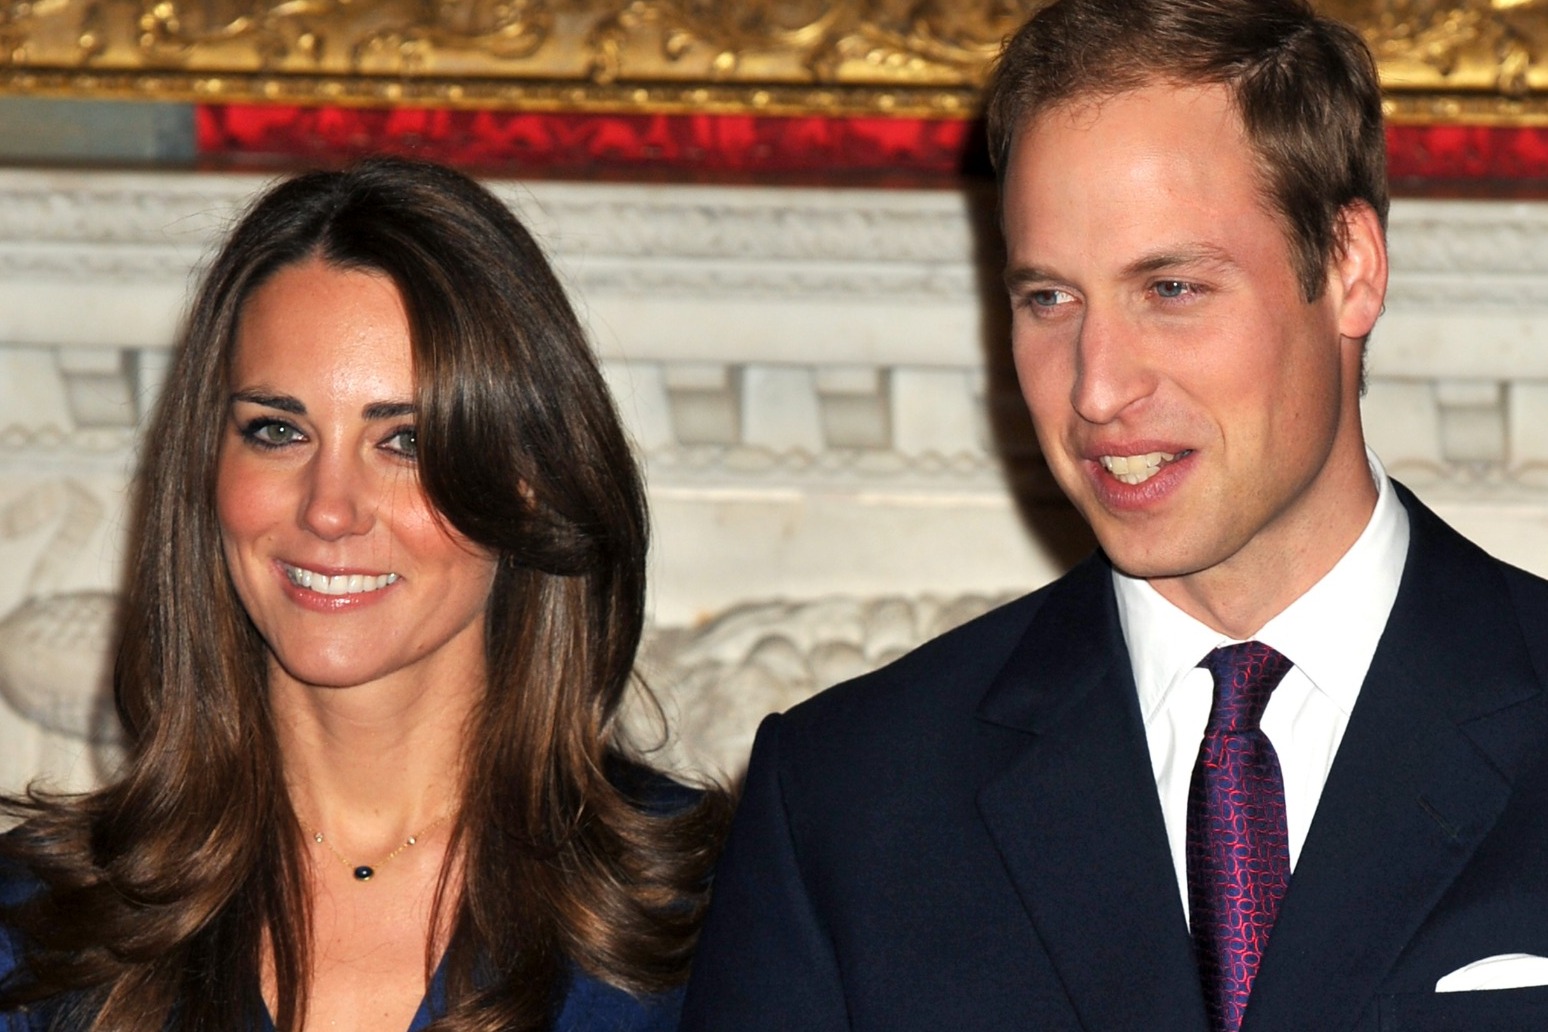 William and Kate to visit Wales for first official visit with new titles 